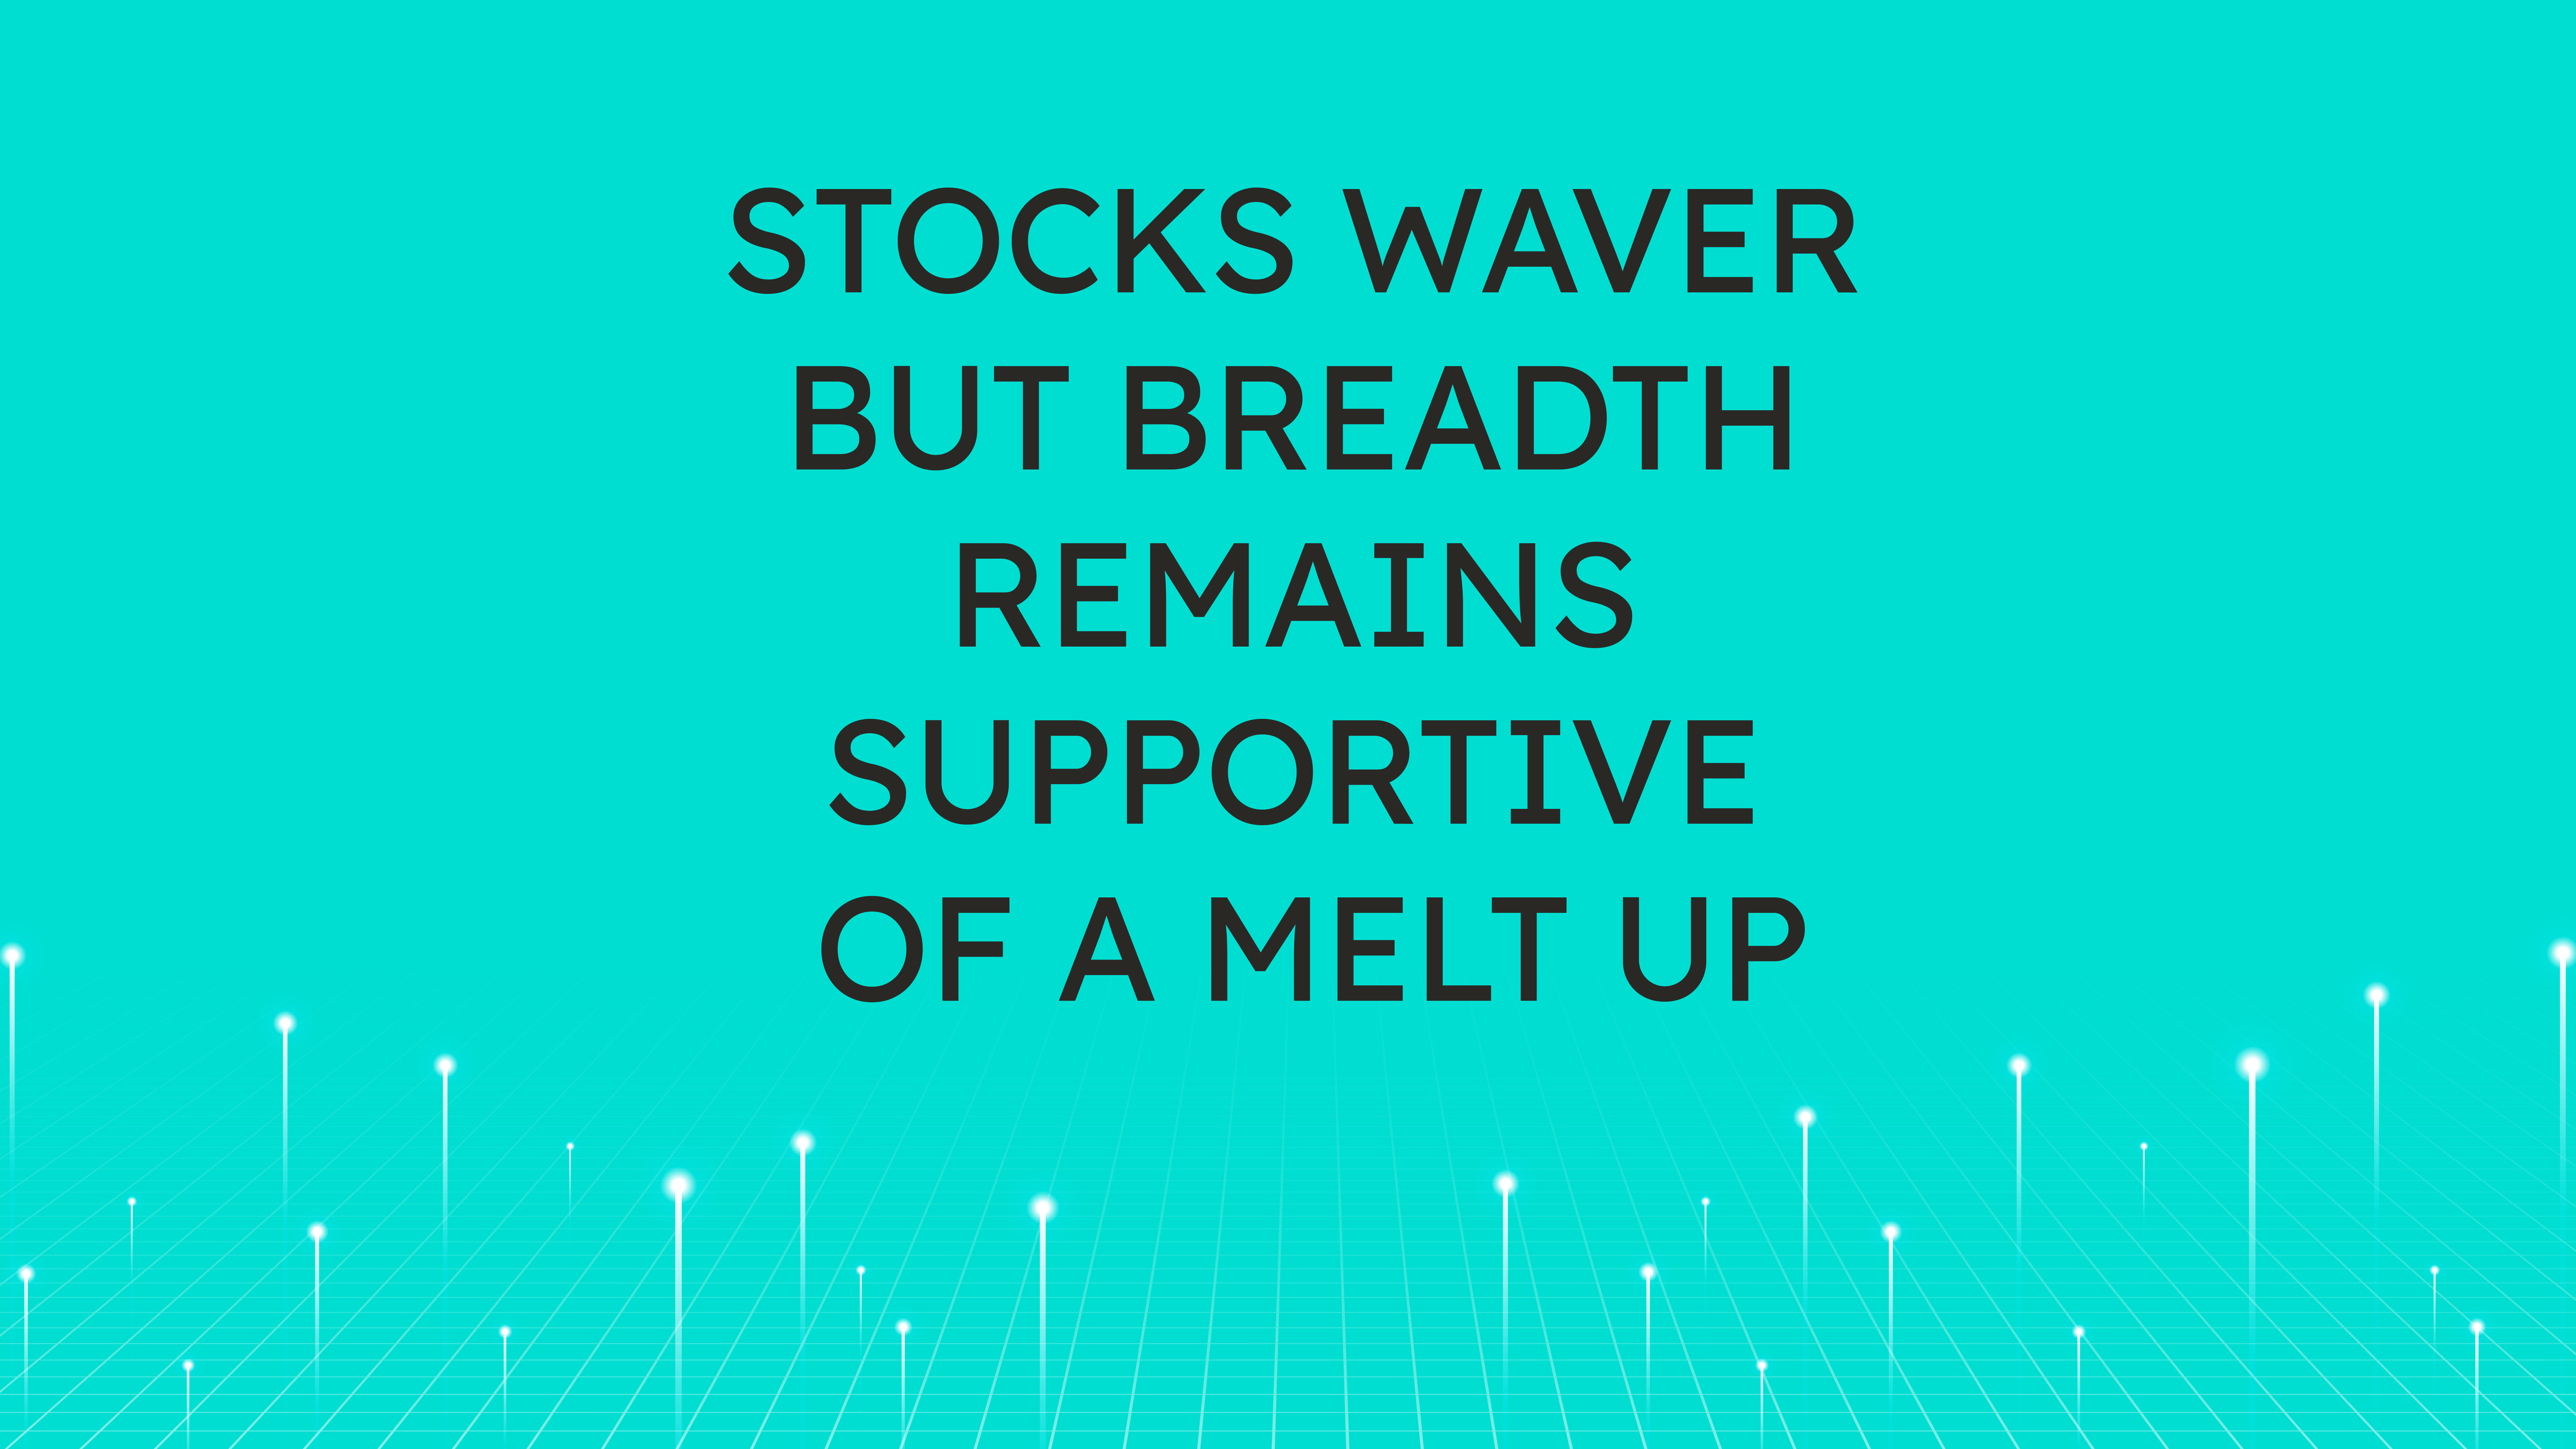 Stocks Waver but Breadth Remains  Supportive of a Melt Up